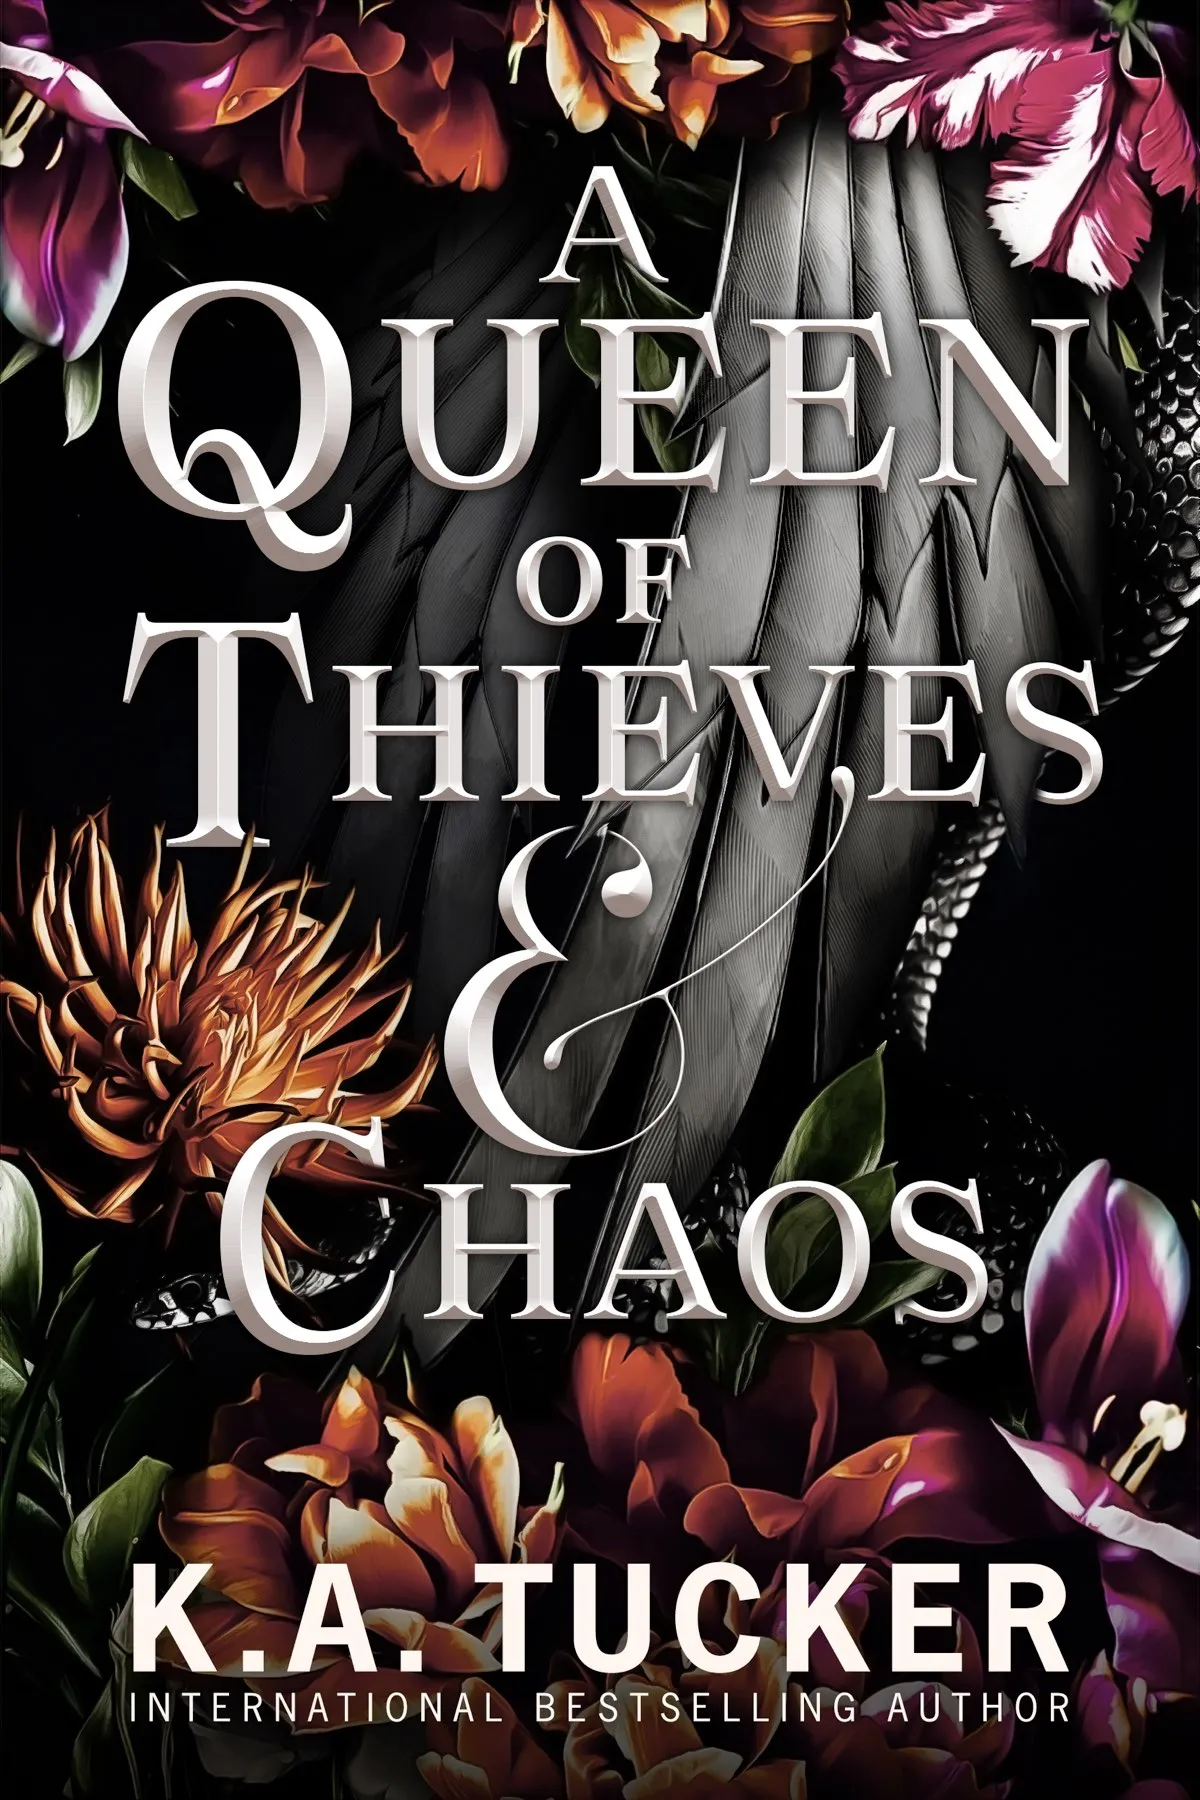 A Queen of Thieves and Chaos (Fate and Flame #3)